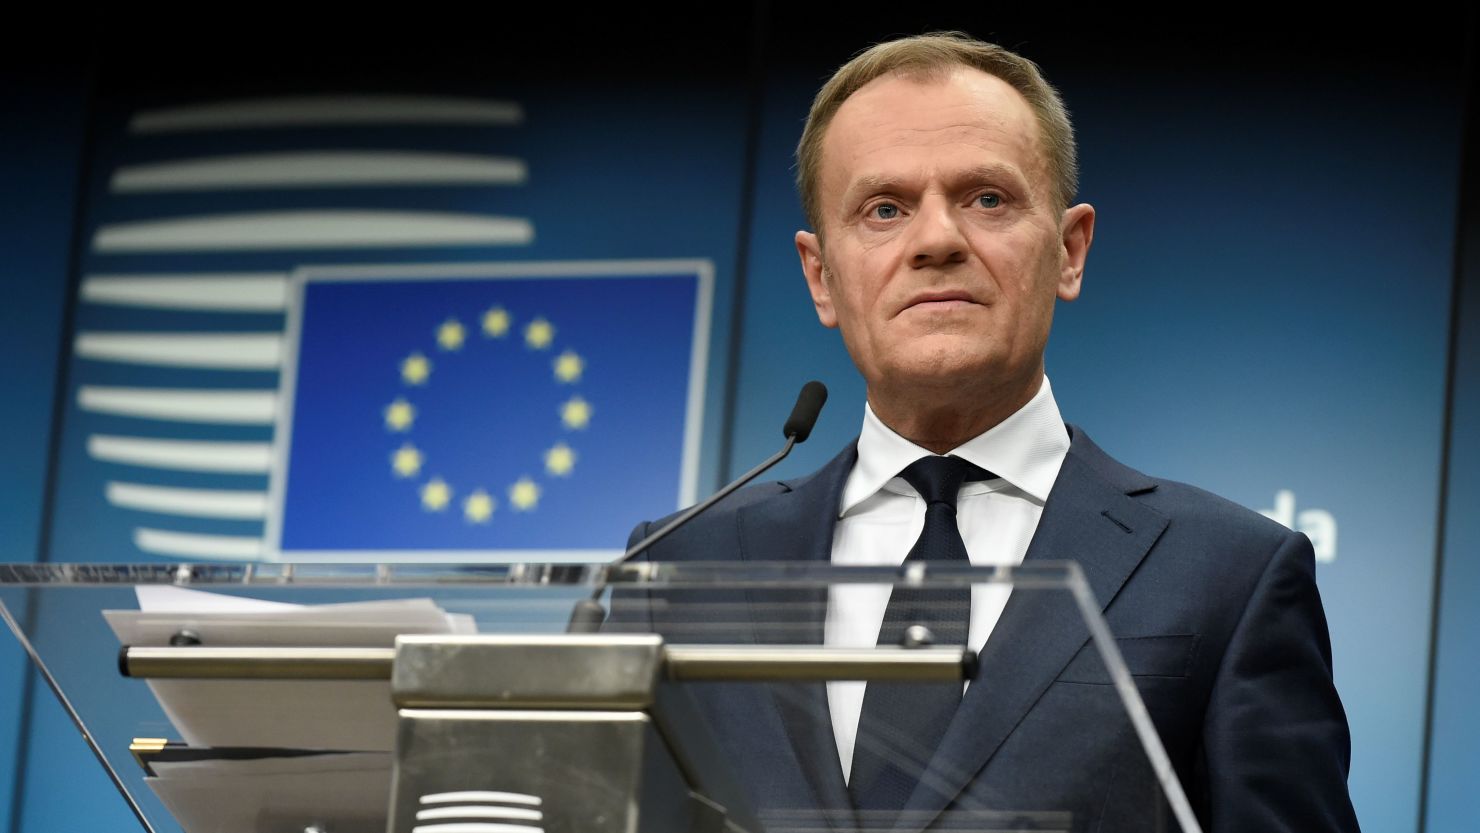 European Council President Donald Tusk has accused Britain of having a "cake philosophy" on Brexit.